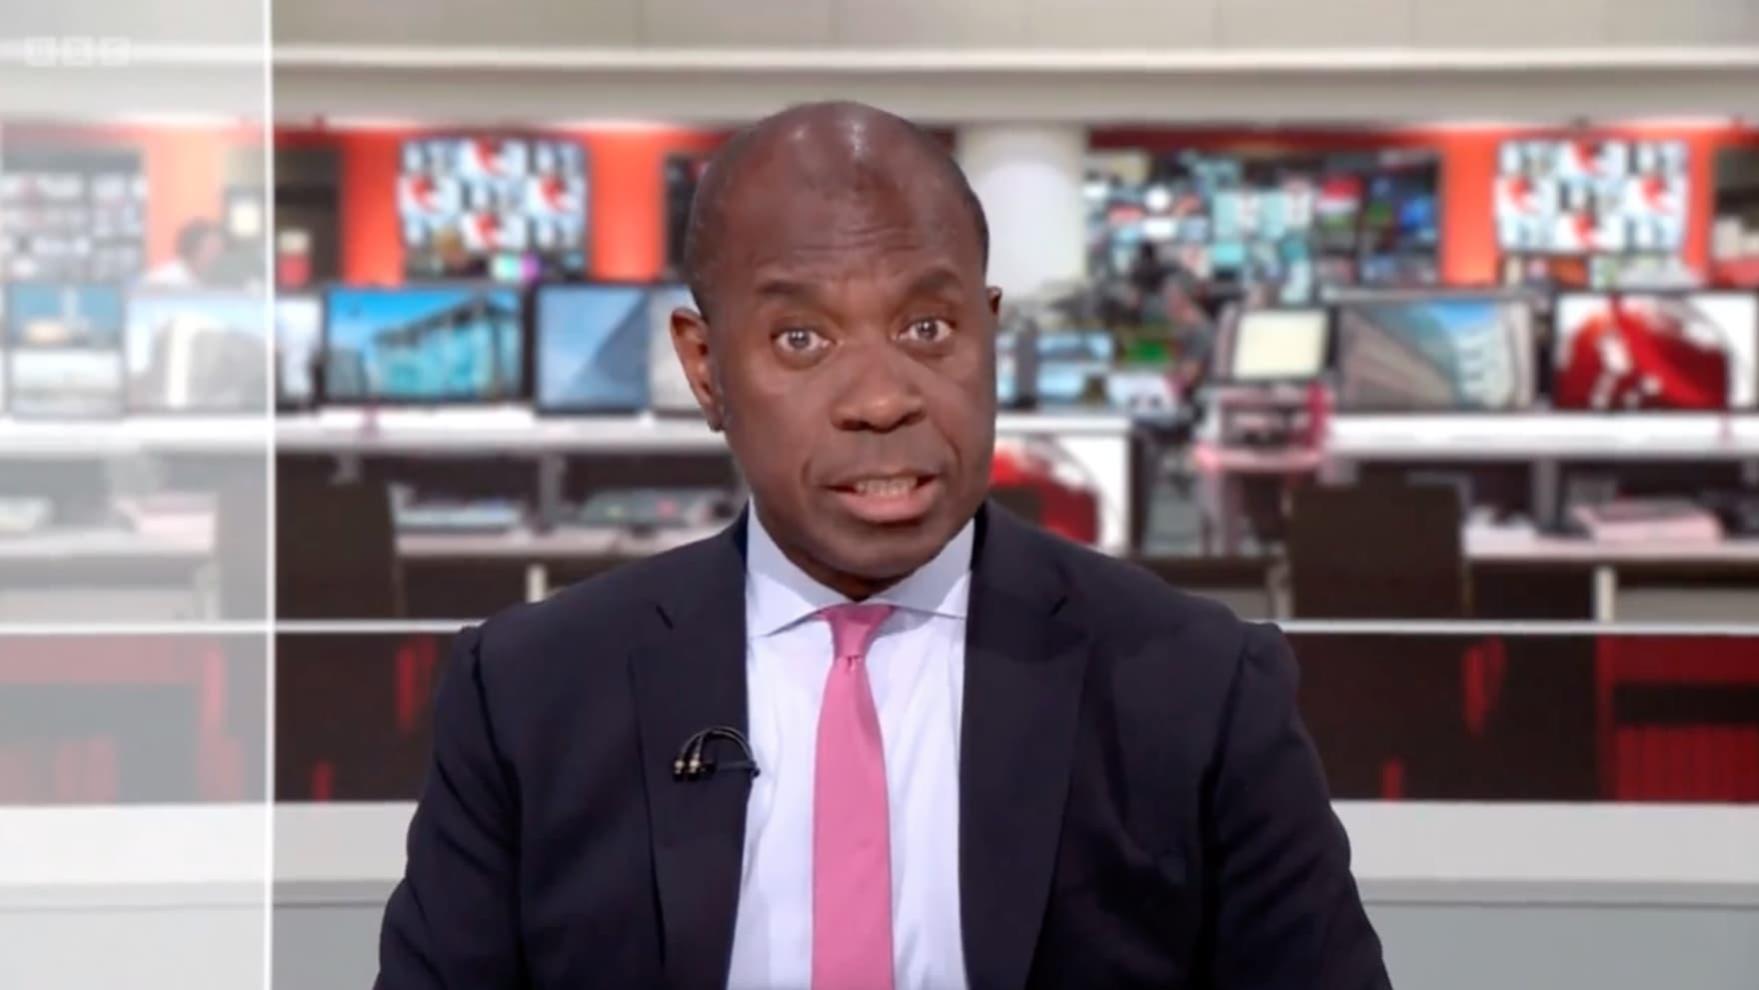 Fans say Clive Myrie had tears in eyes reporting on Huw Edwards picture